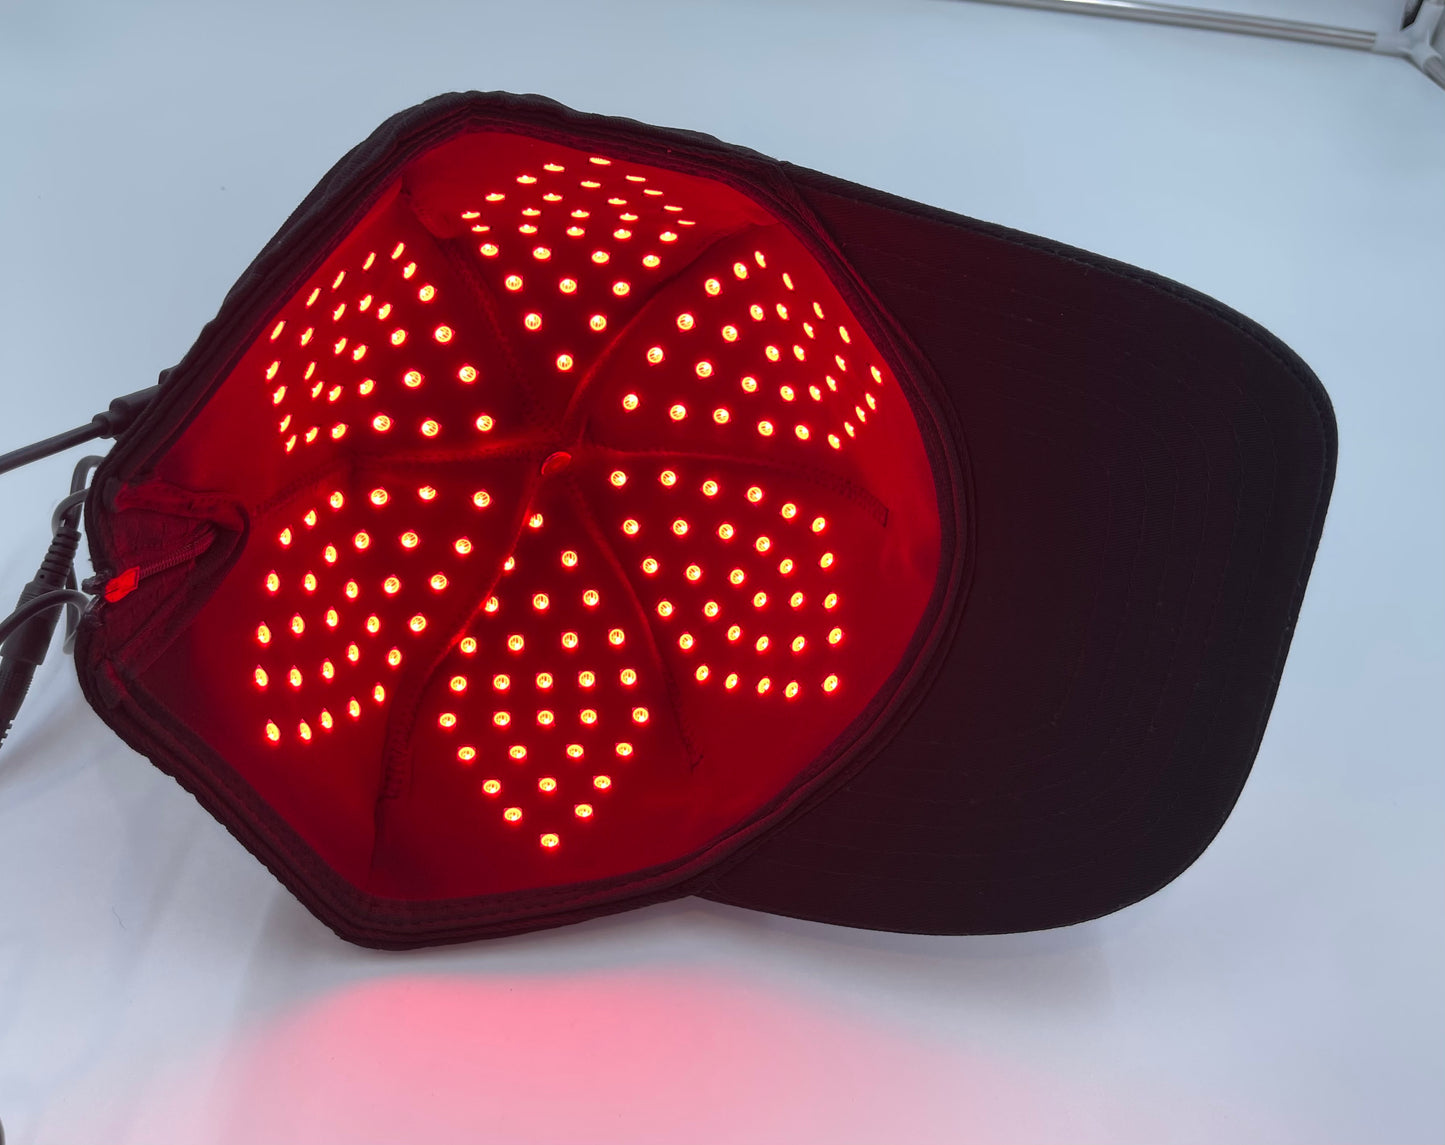 Red Light Hat With 900 Powerful LED's